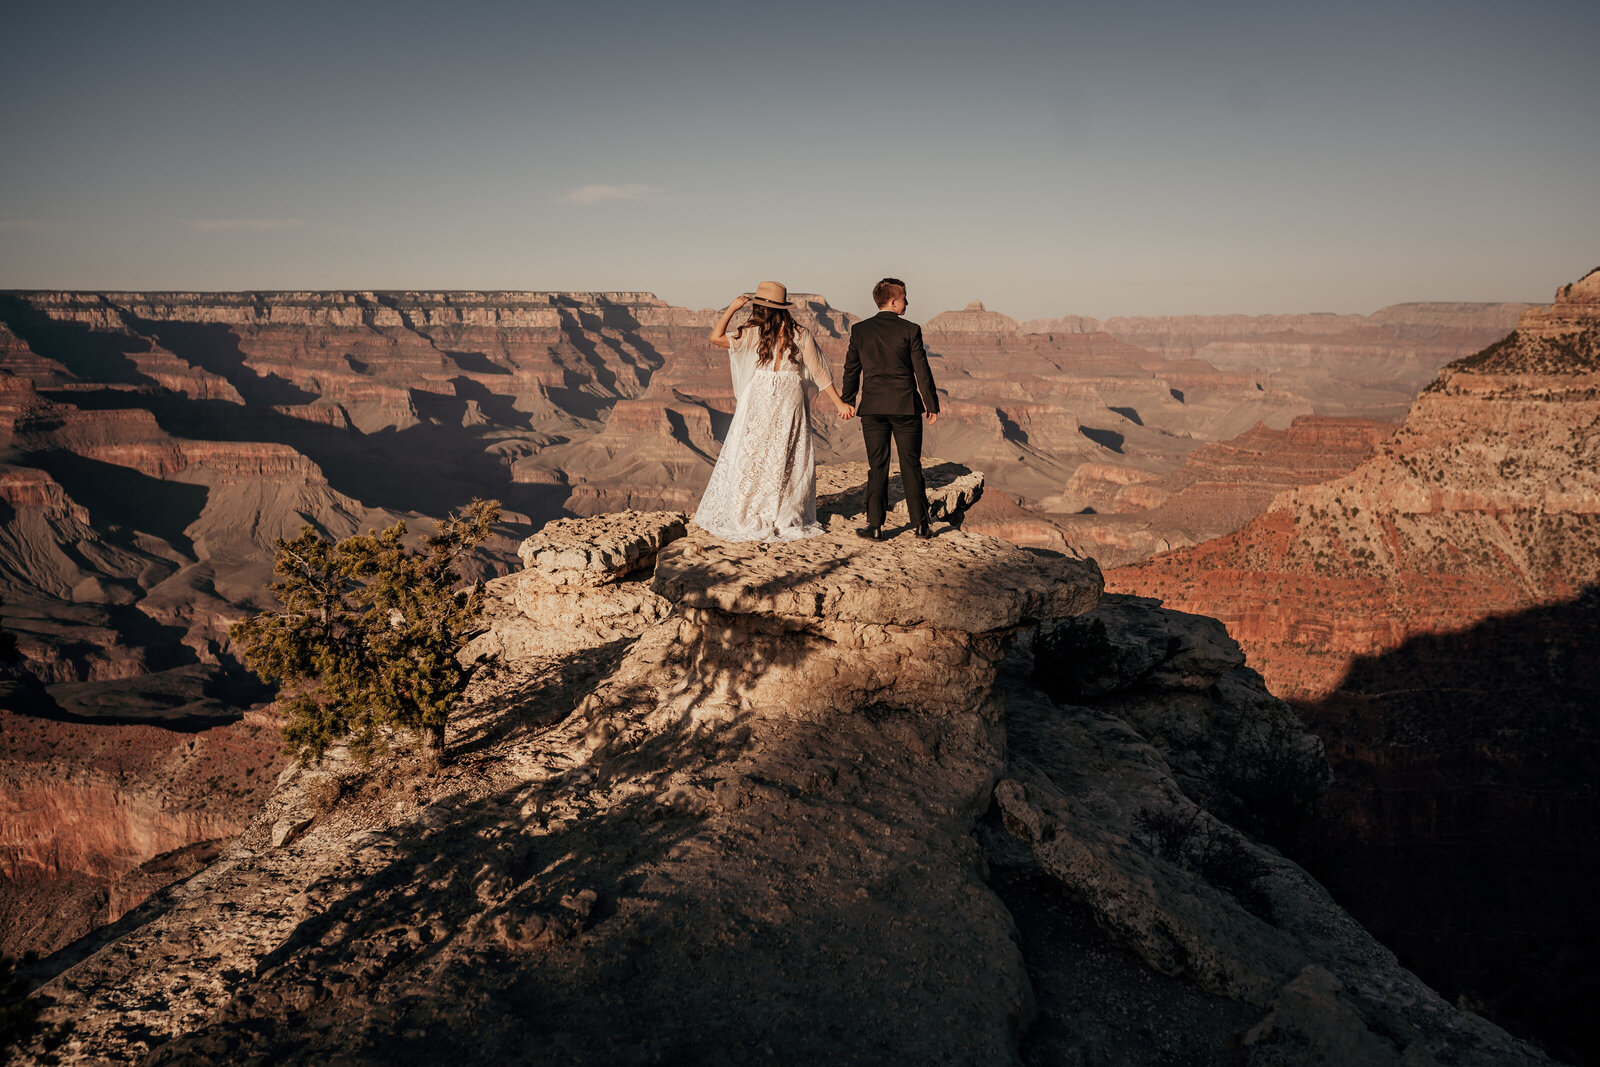 An adventure and elopement wedding based in Arizona at the Grand Canyon